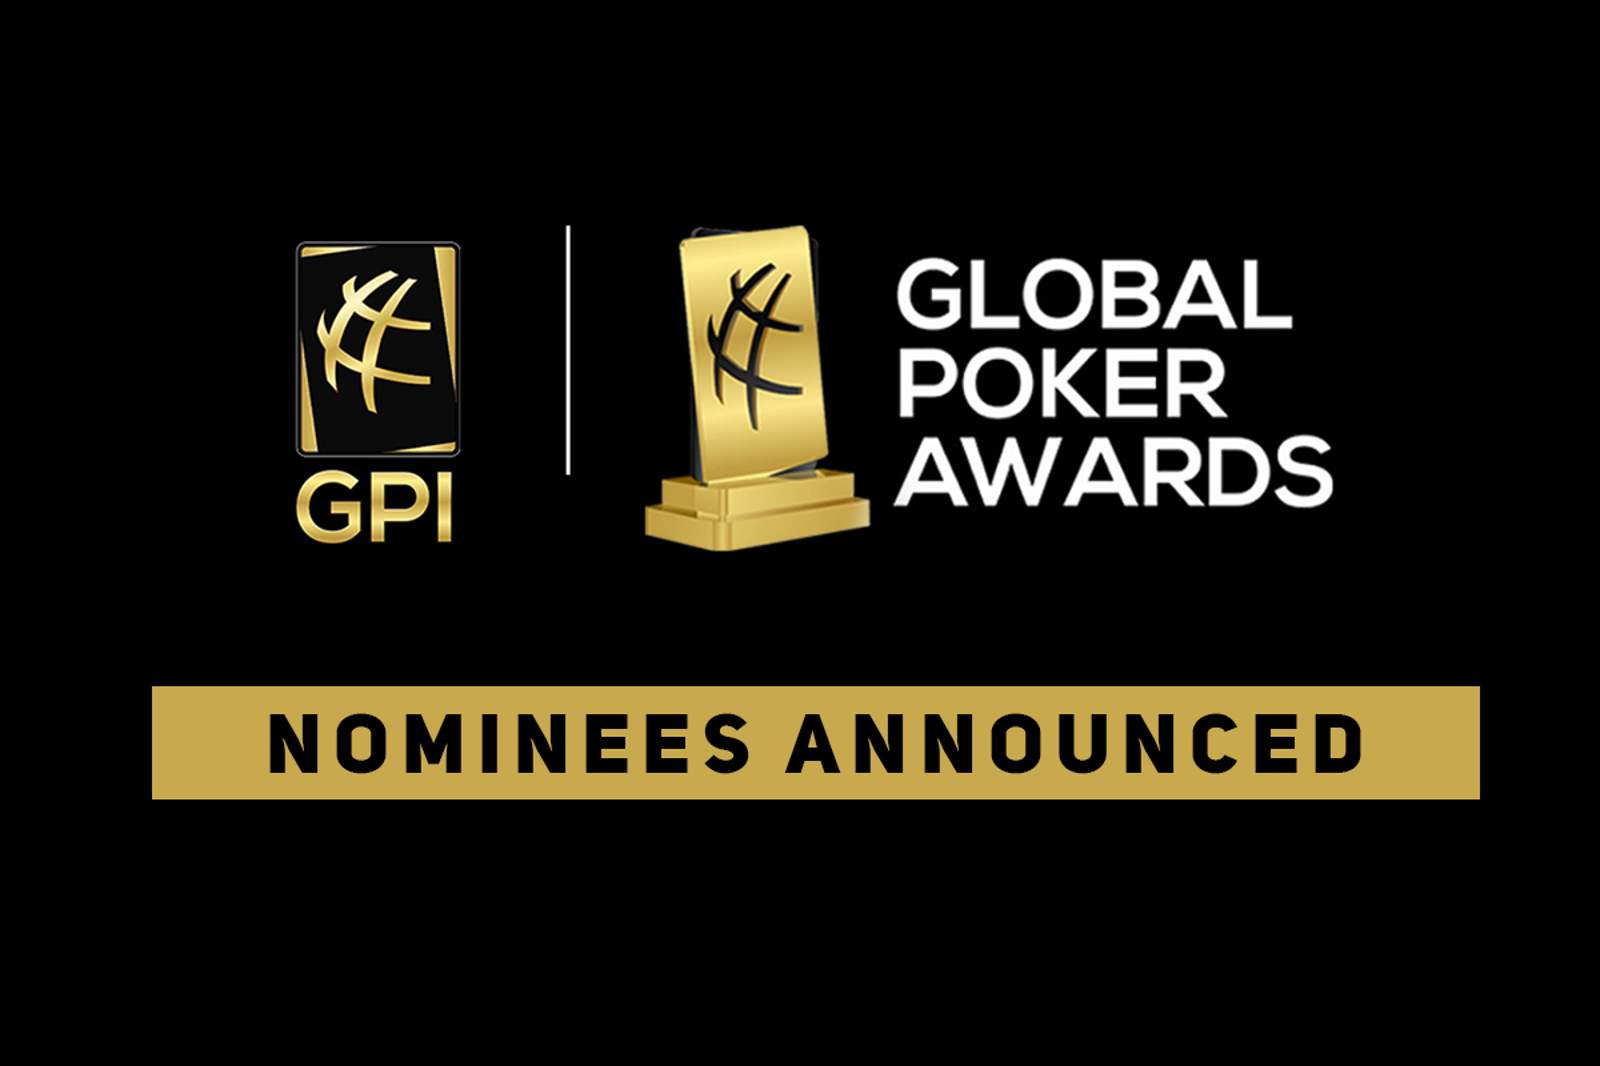 2019 Global Poker Awards Nominees Announced